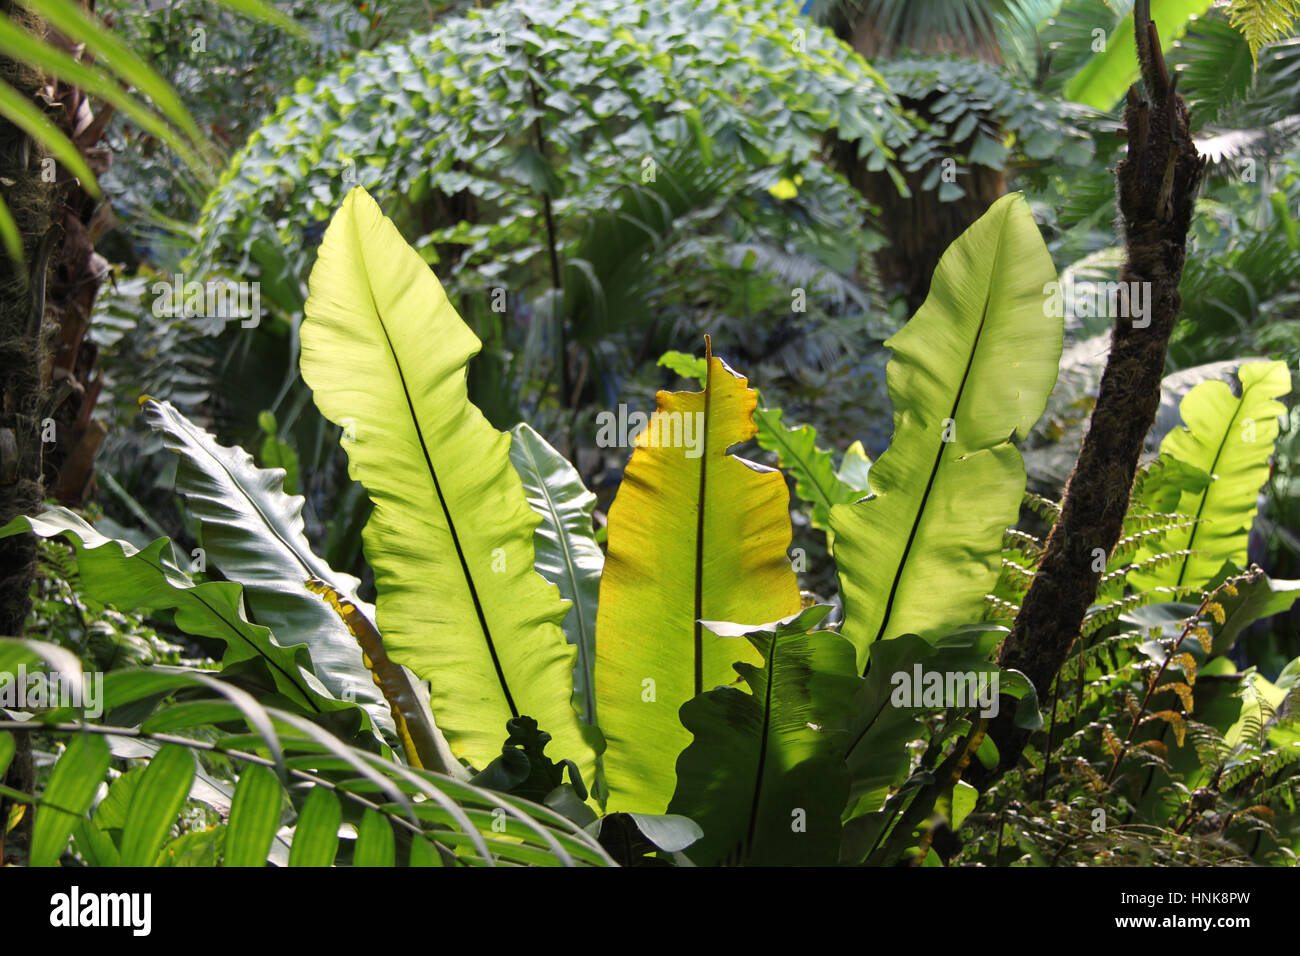 Bird's nest fern with large leaves in tropical rainforest / jungle